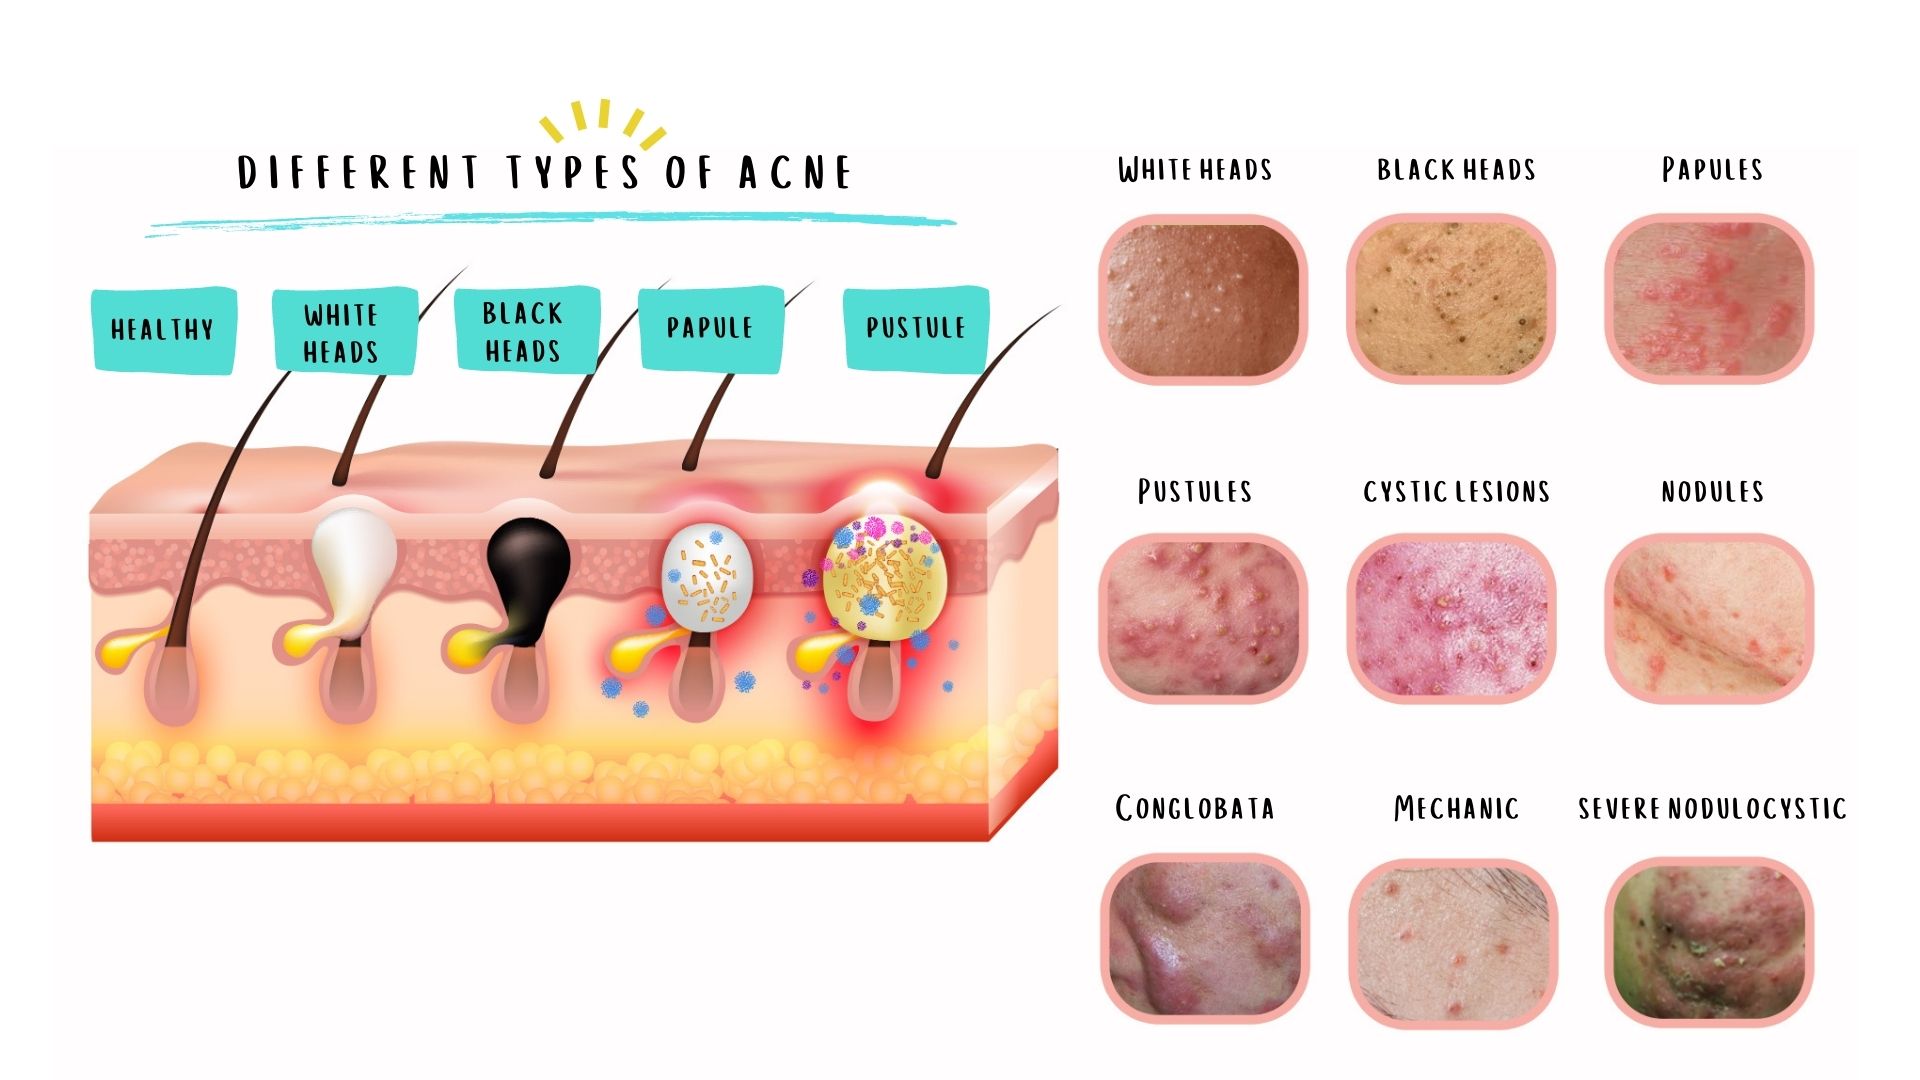 What Are The Different Types of Acne